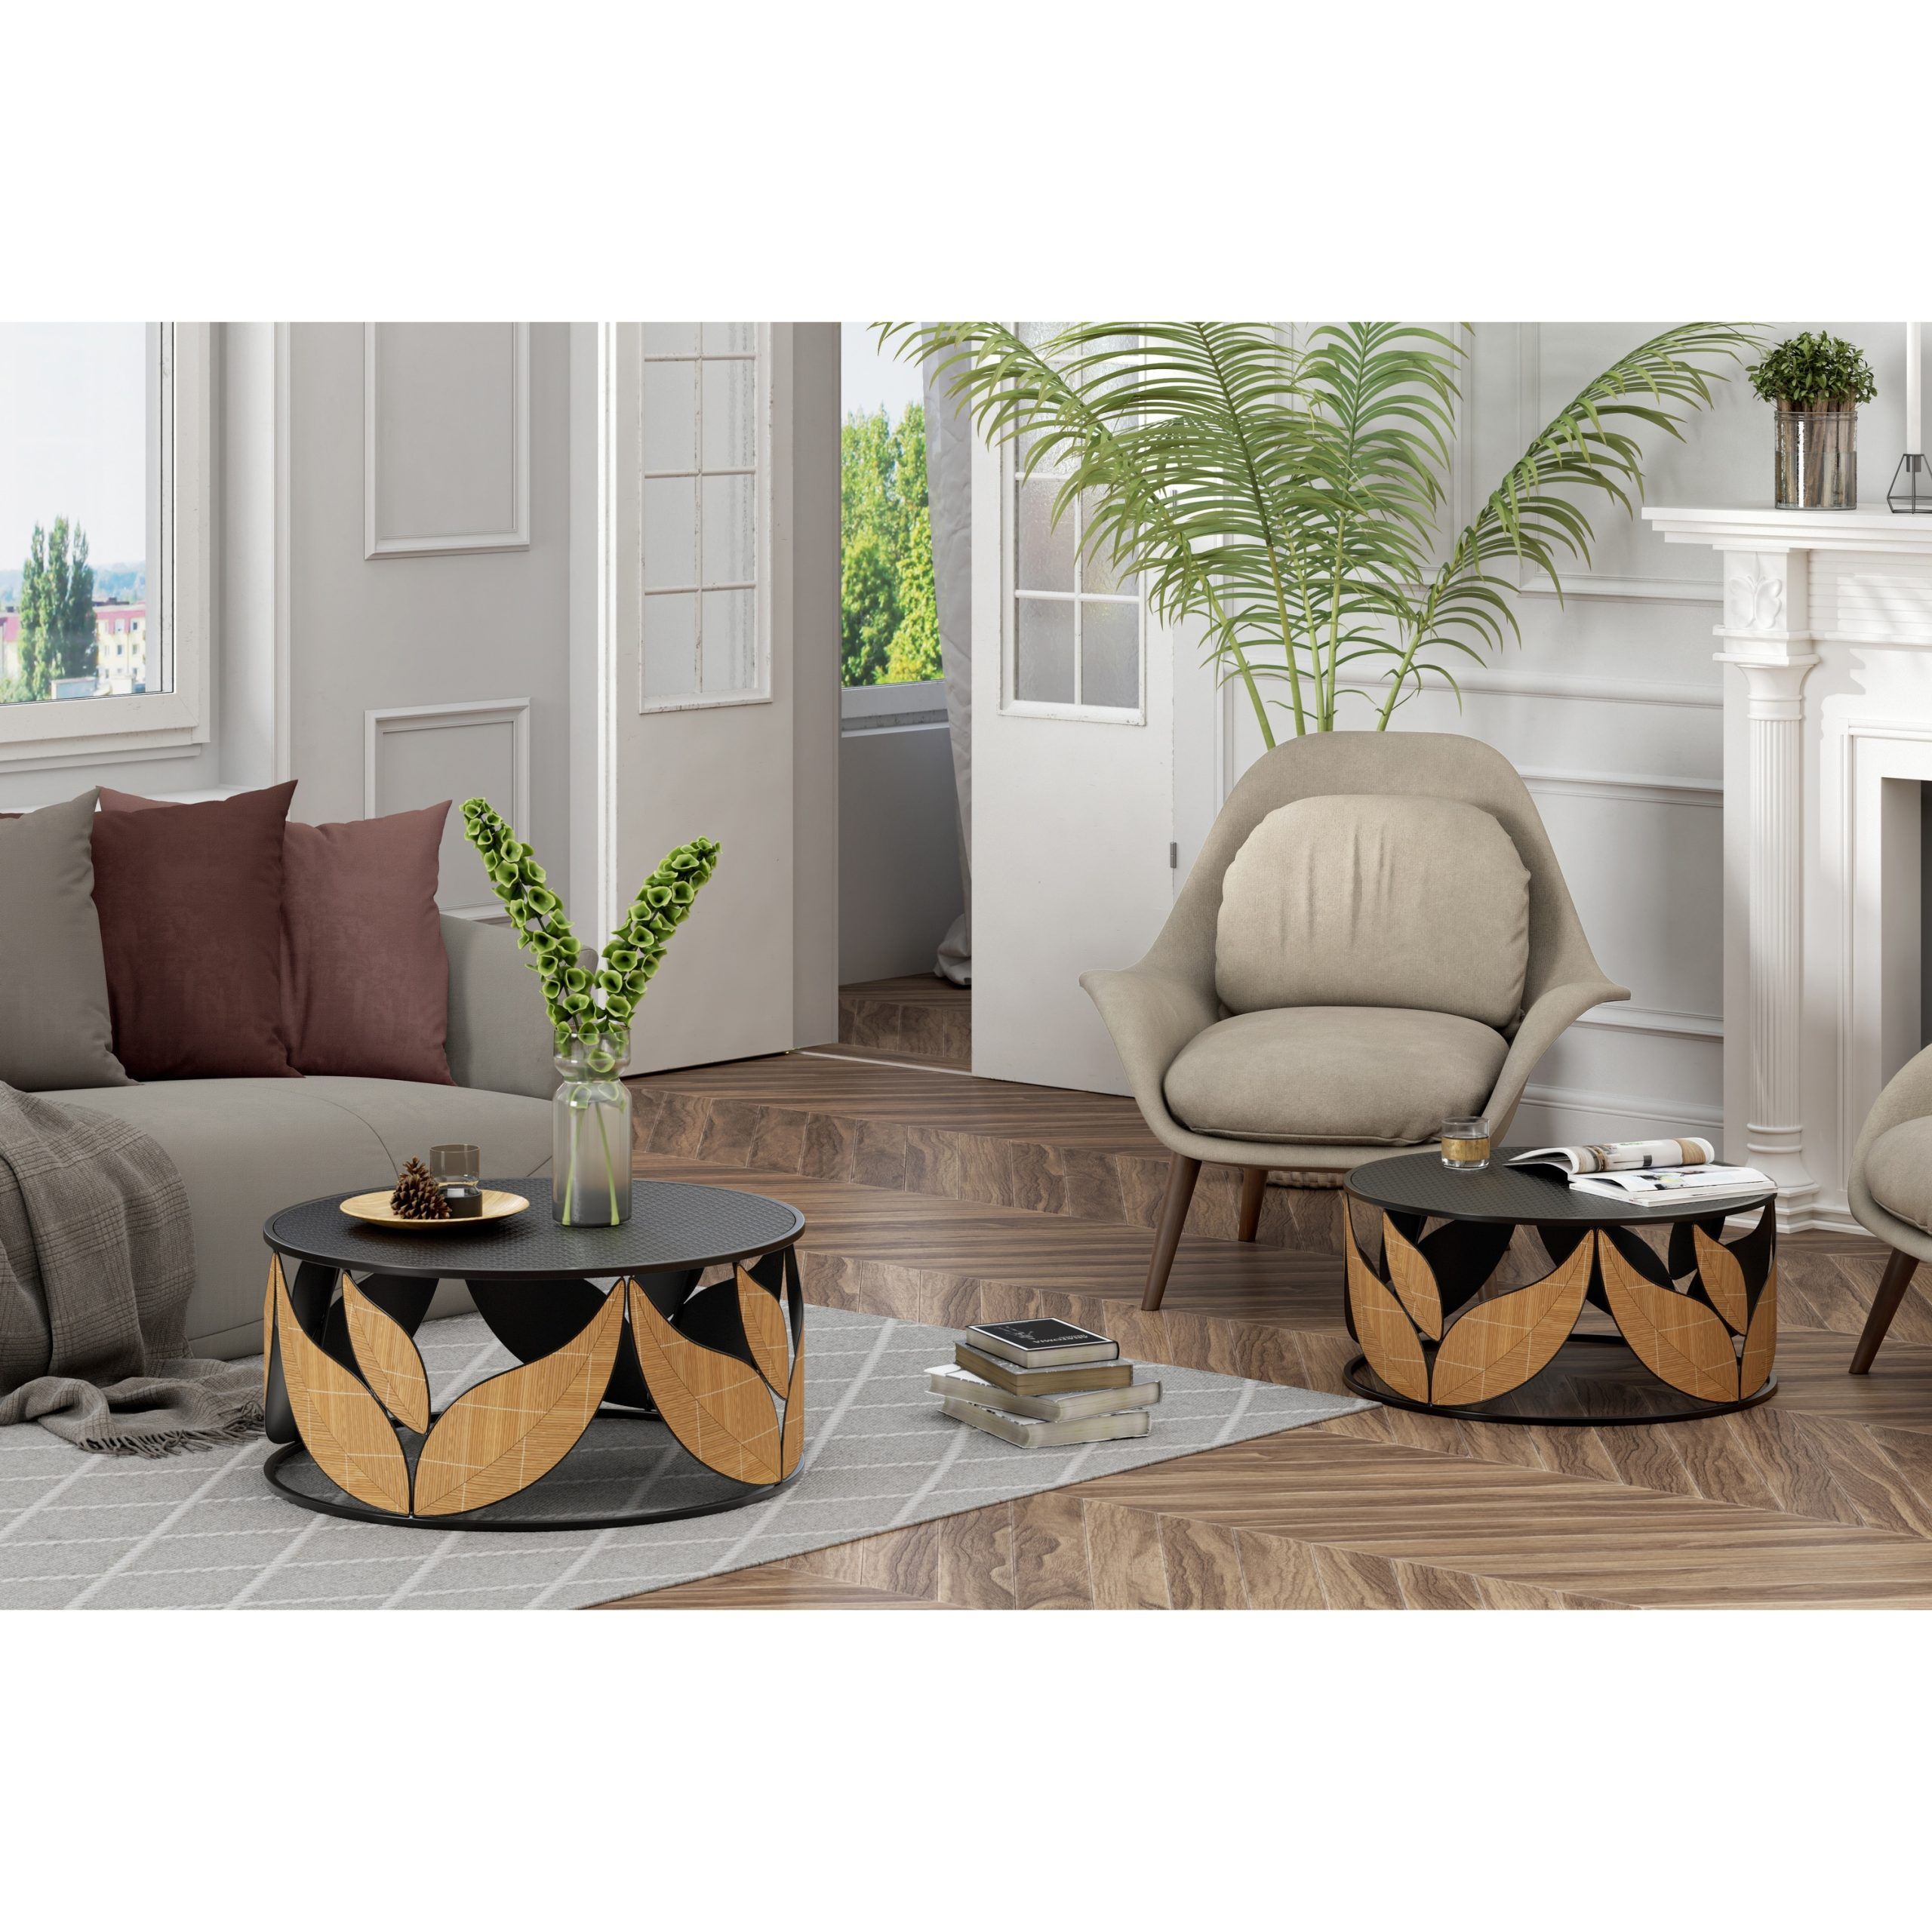 Cozayh Modern Farmhouse Coffee Table Set Of 2, Round Coffee Table  Fully Assembled Table With Leaf Decoration For Living Room – On Sale – Bed  Bath & Beyond – 37164437 Intended For Modern Farmhouse Coffee Table Sets (View 12 of 15)